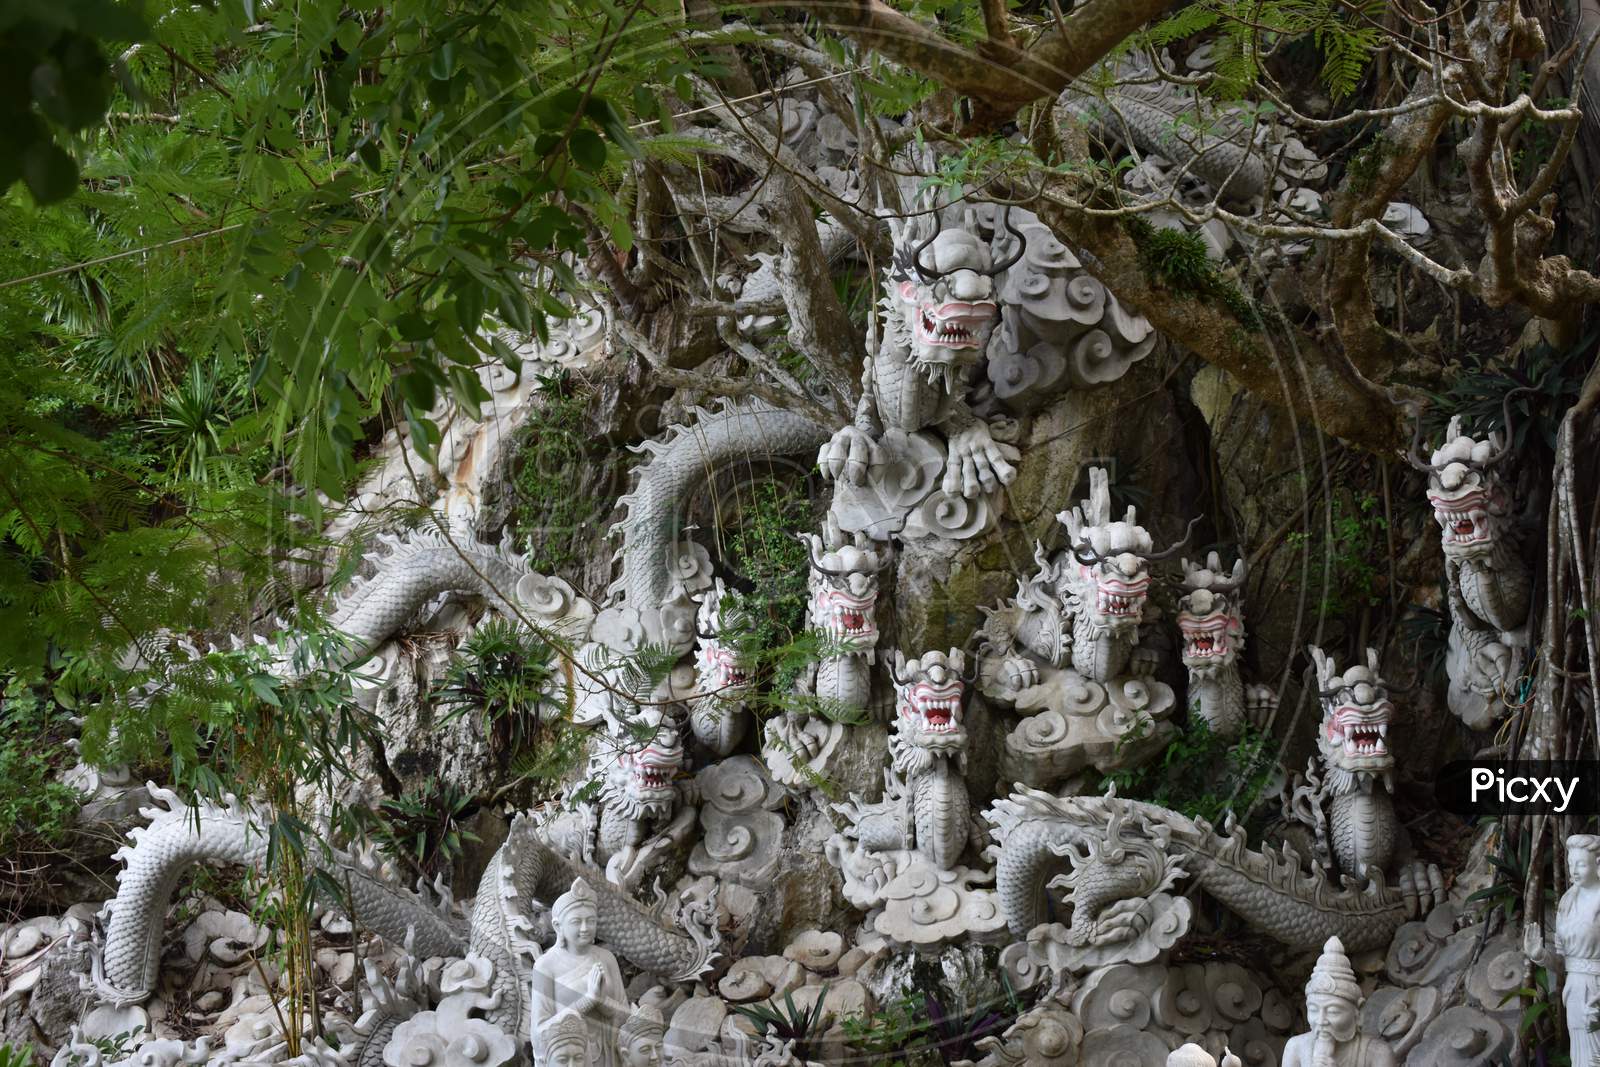 The dragons are staring at you for your next move in Da Nang Vietnam